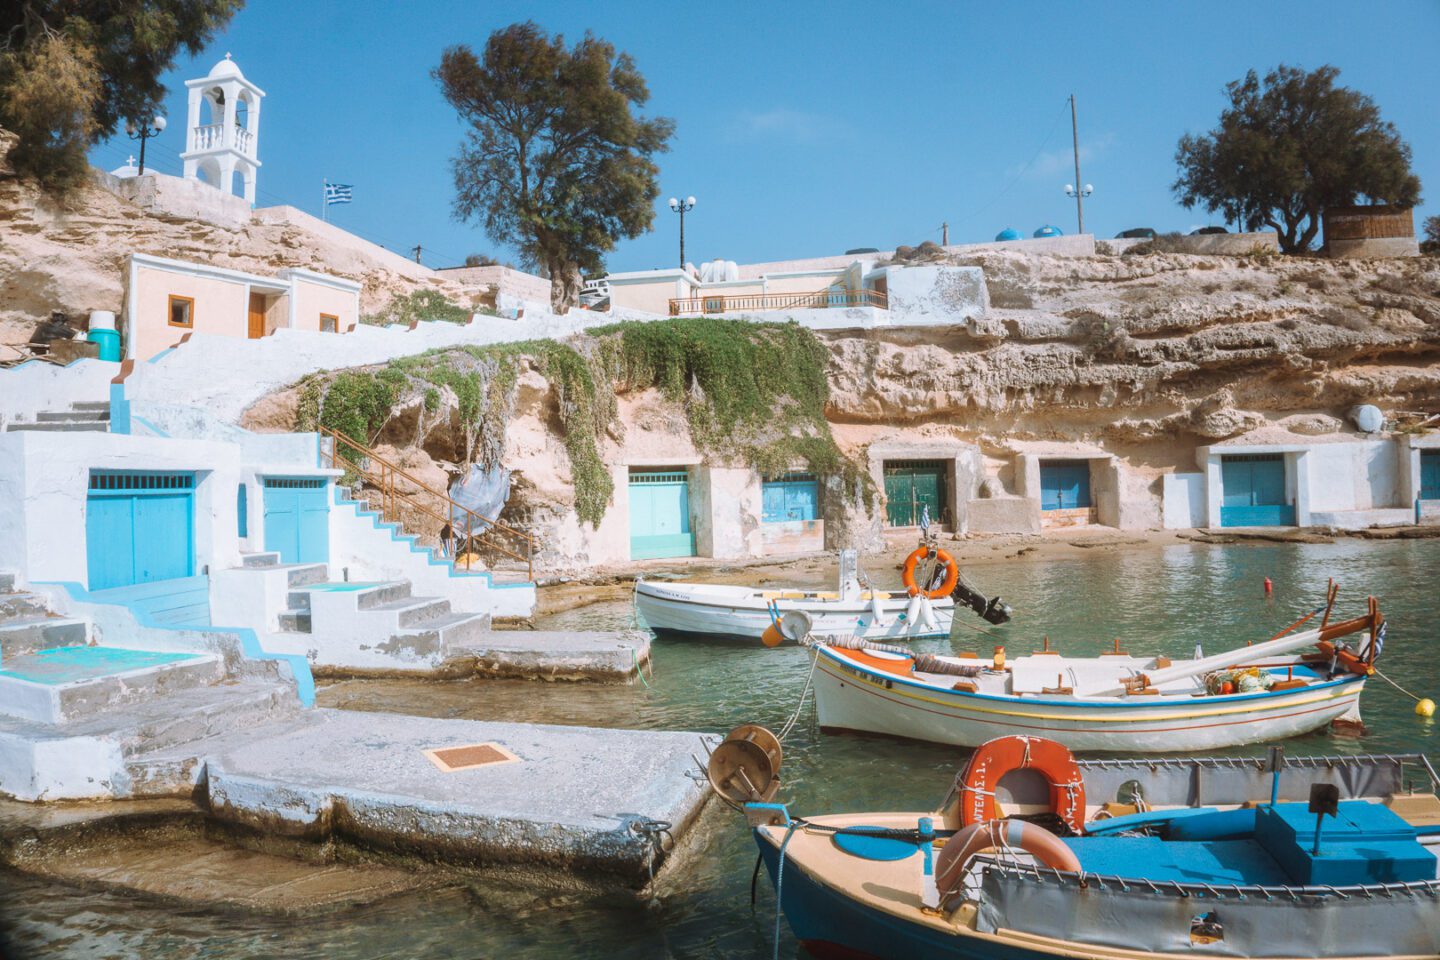 The colourful boat sheds and boats of Mandrakia, a charming fishing village on the island of Milos in Greece.